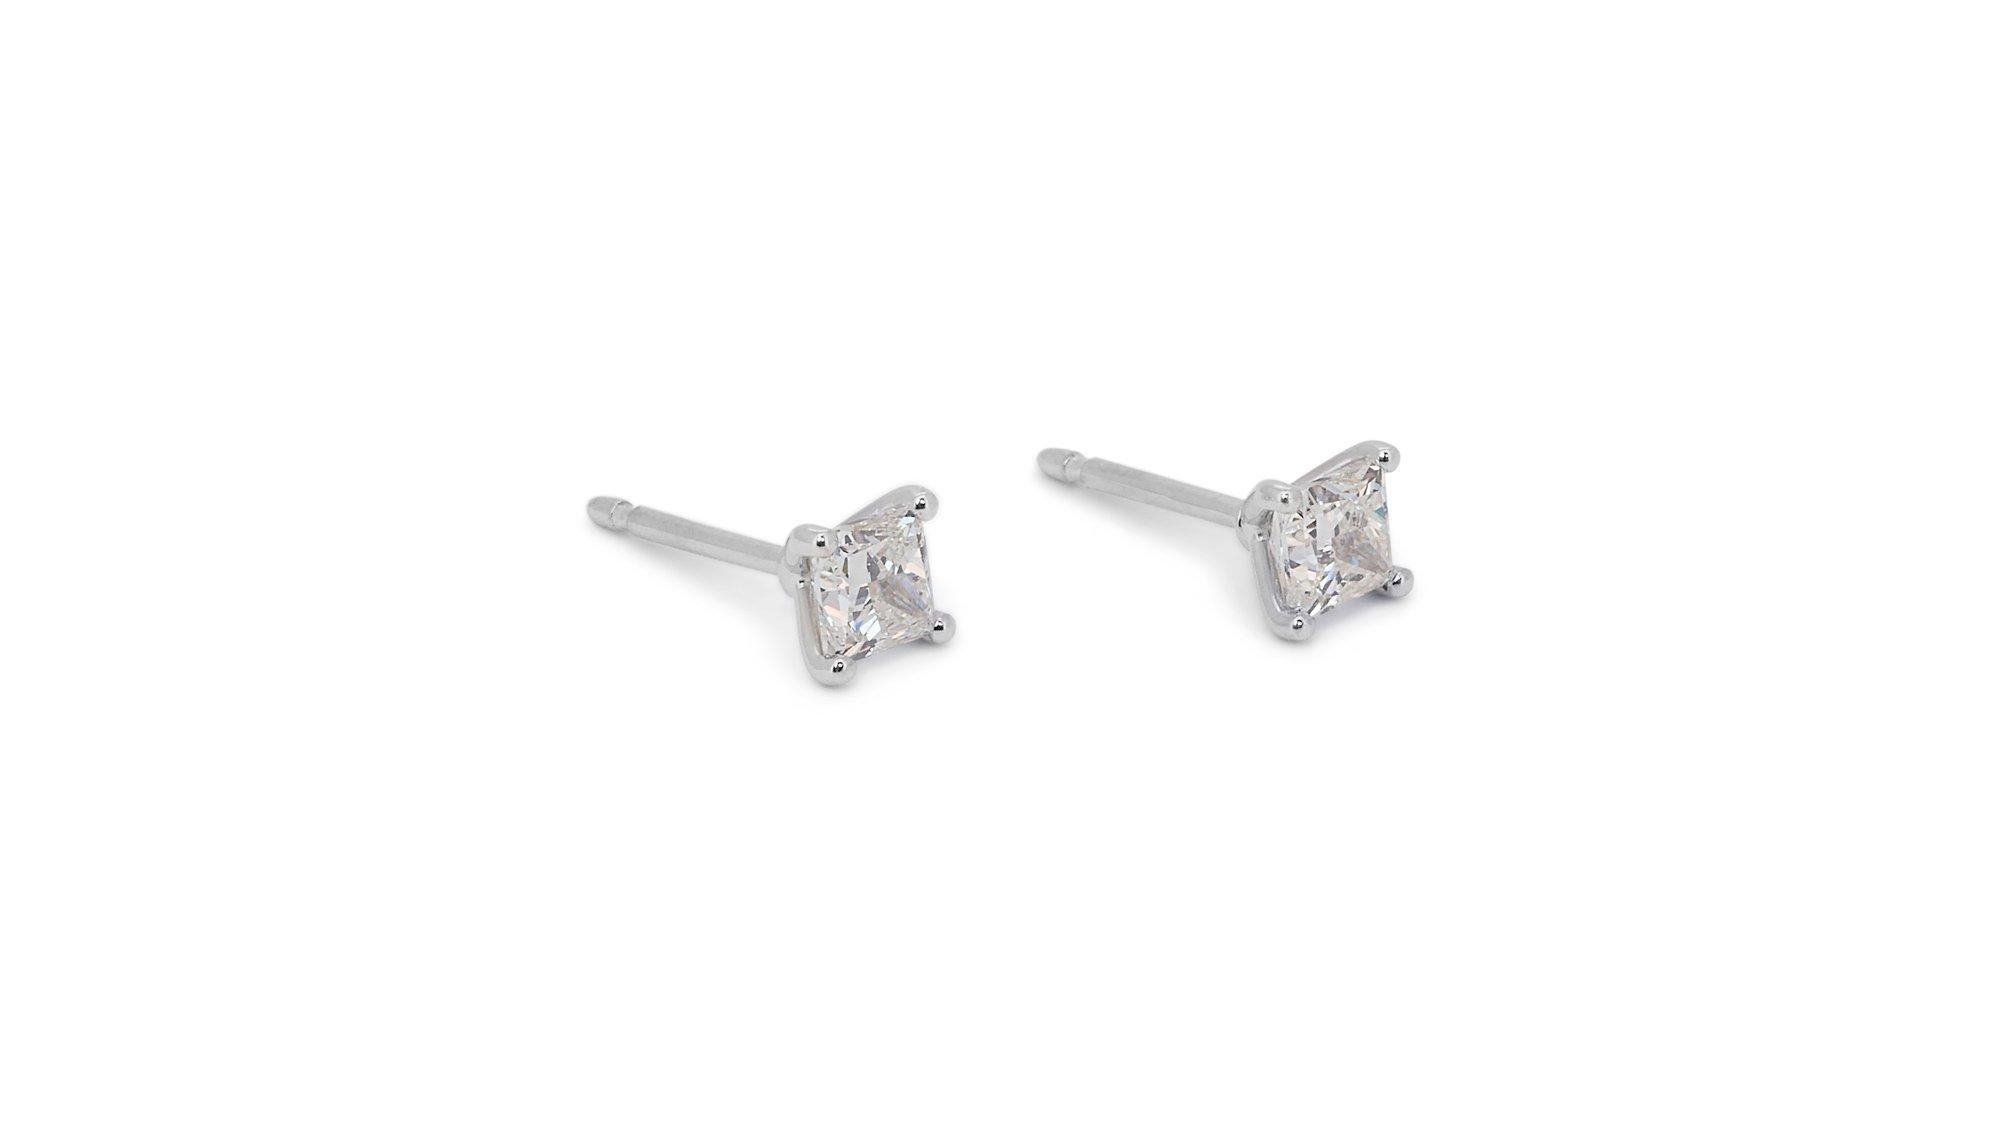 18k White Gold Princess Stud Earrings with 0.85 ct Natural Diamonds AIG Cert 2